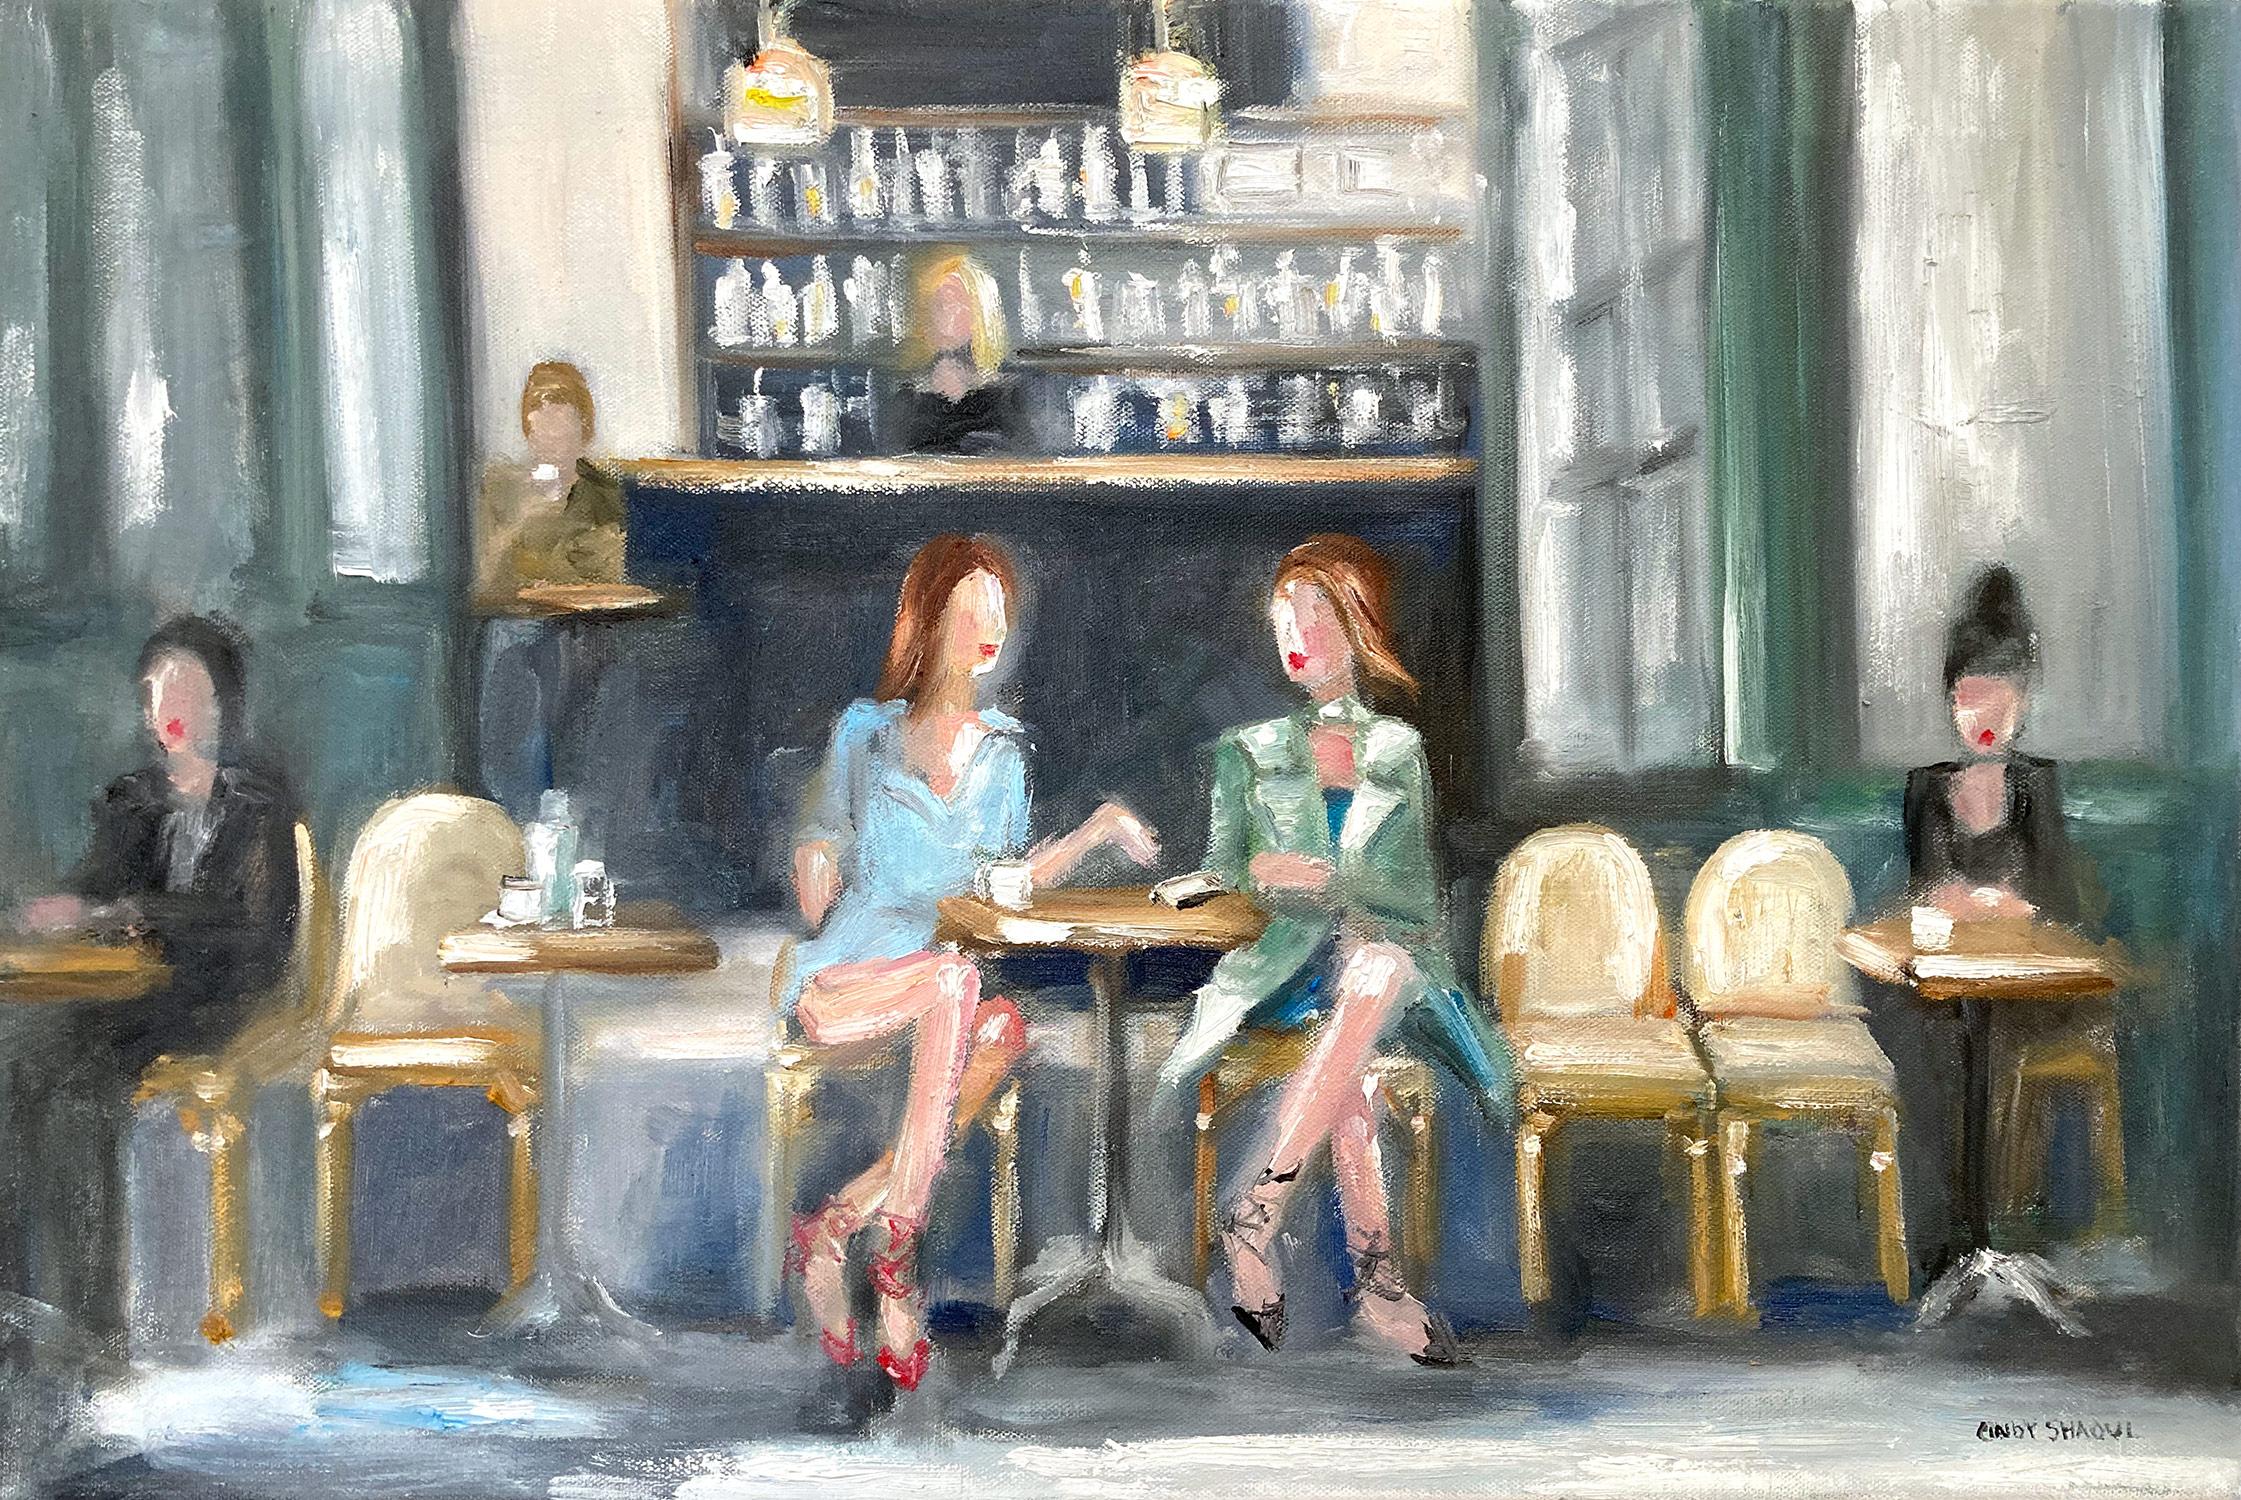 Cindy Shaoul Landscape Painting - "Hold the Preserves" Parisian Cafe Scene from Hit Show Emily in Paris Oil Paint